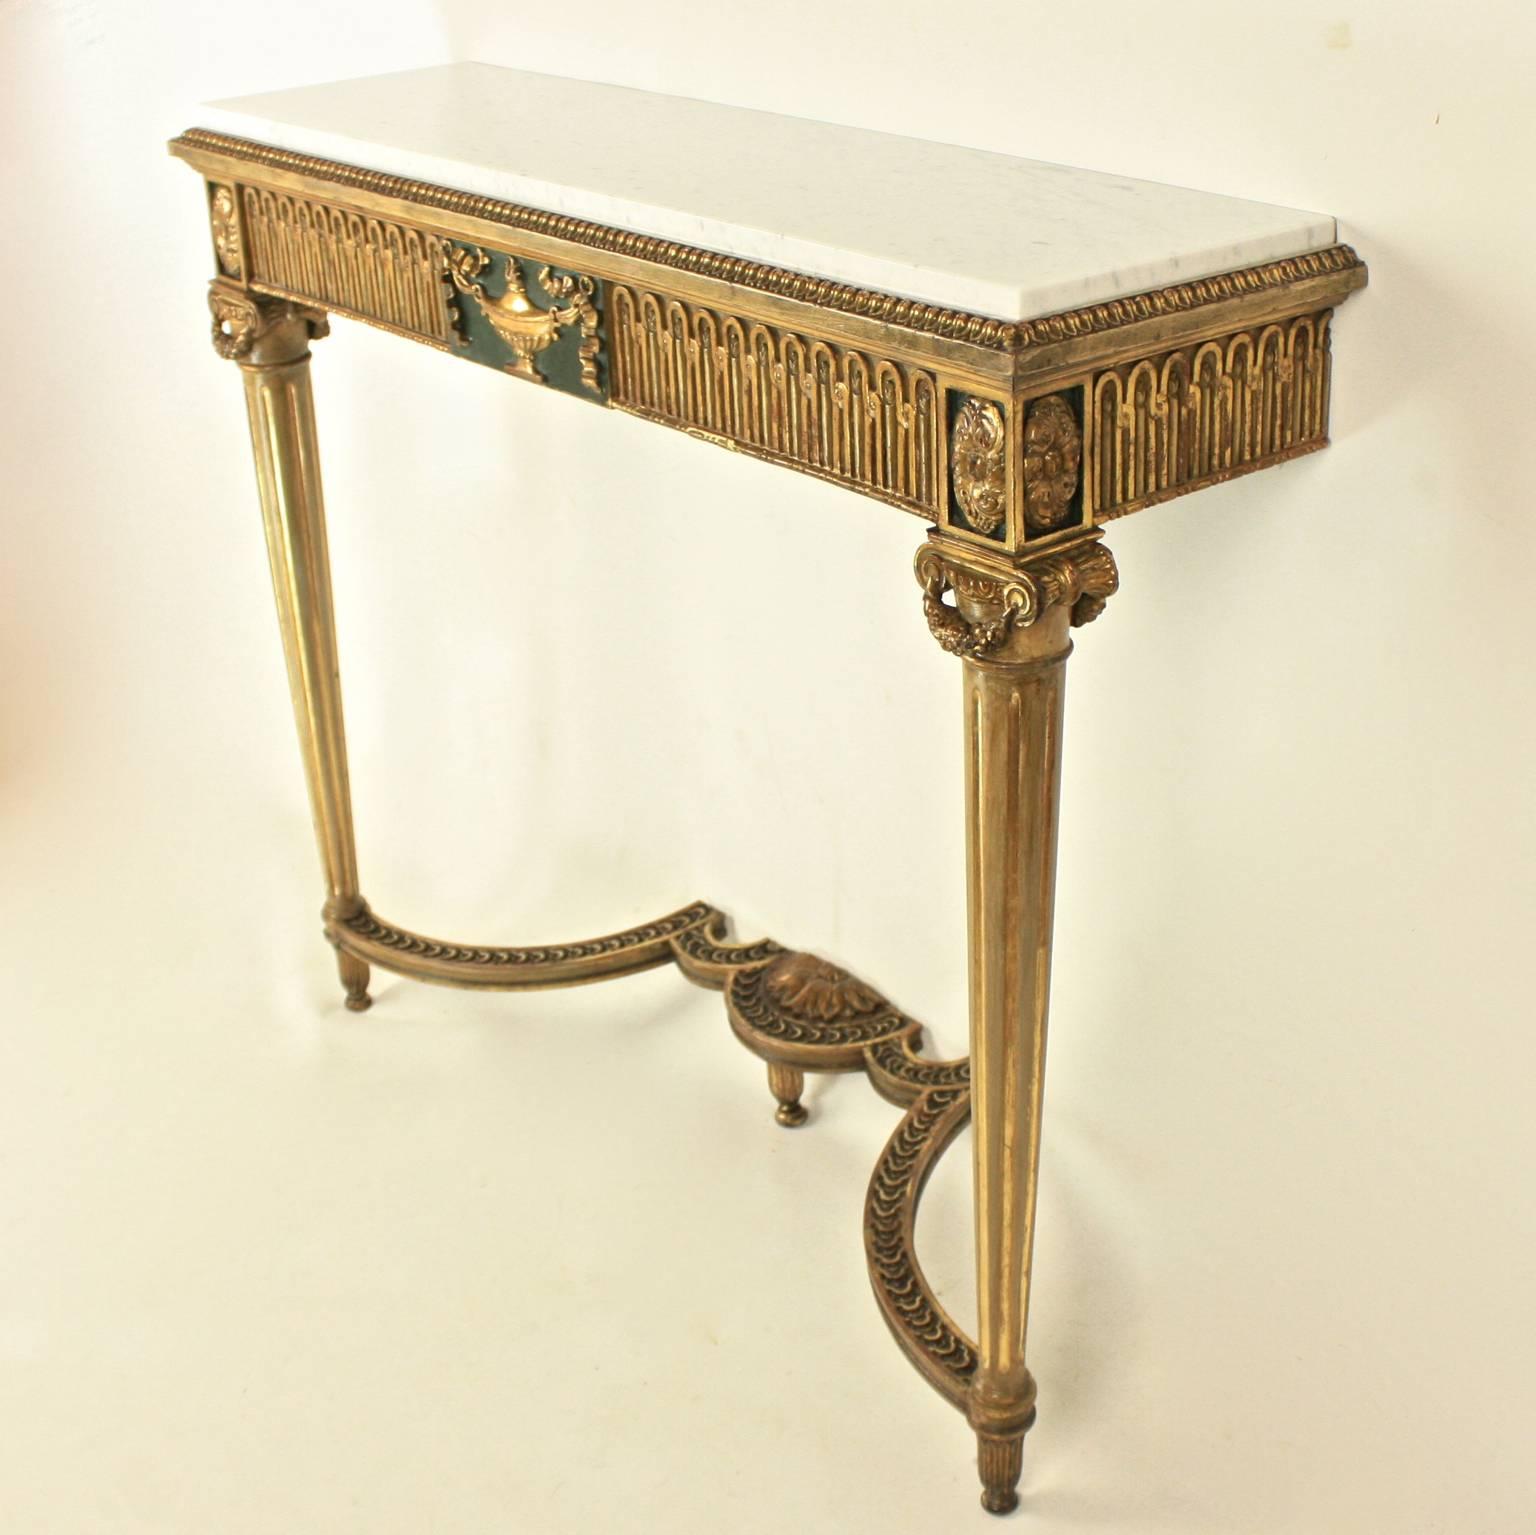 A pair of narrow Louis XVI style console tables, each with a rectangular white marble top above a fluted frieze centered by a ribbon tied giltwood urn on a dark green background and paterae on the corners. The tables are raised on fluted tapering